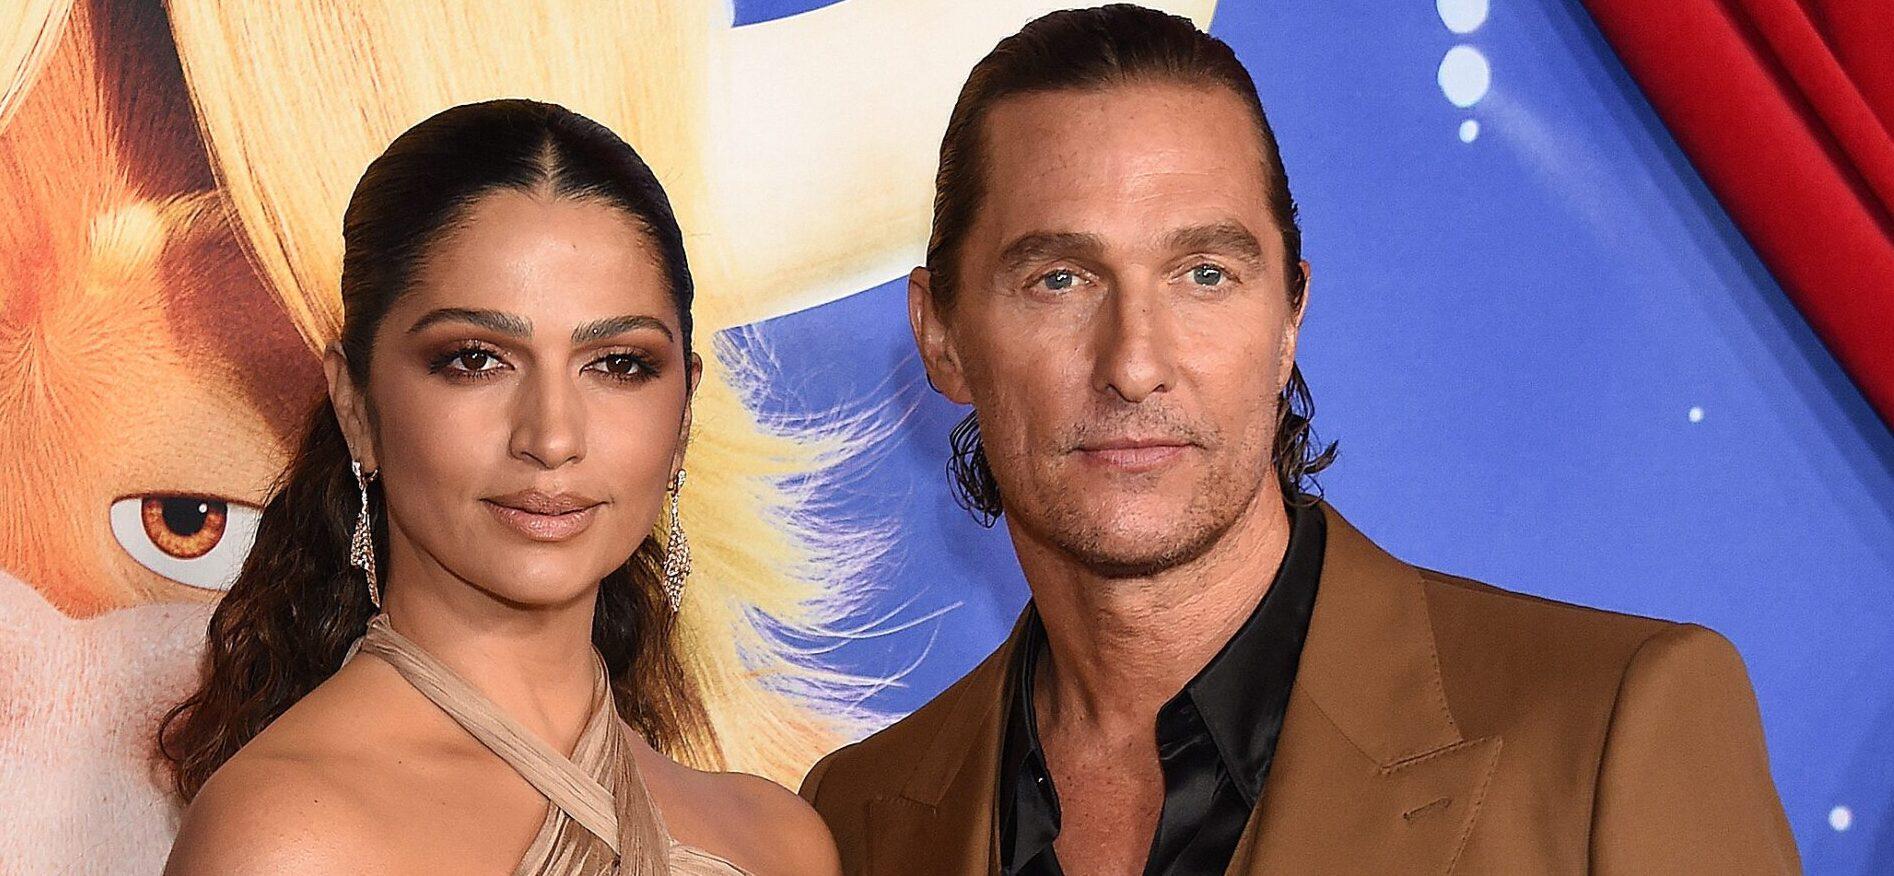 Matthew McConaughey & Wife Reveal ‘The Best Thing We’ve Made With Our Pants On’